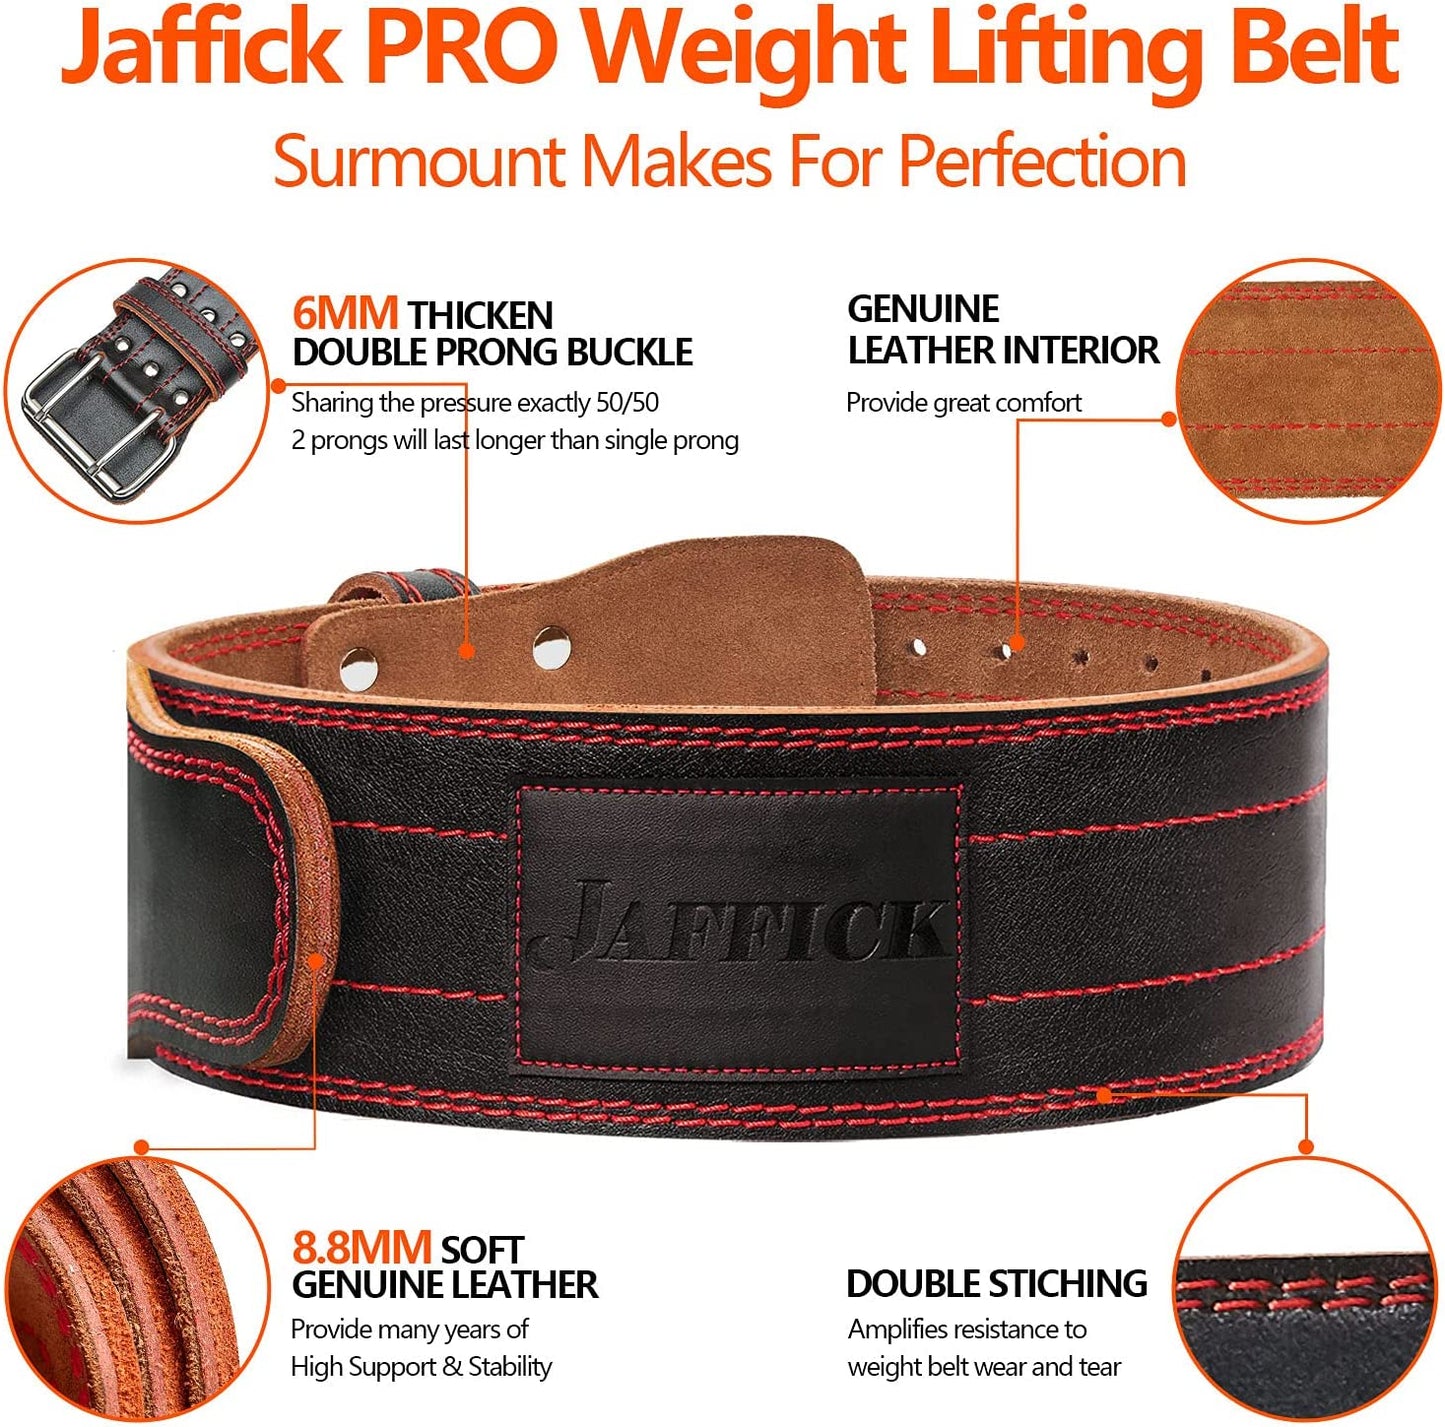 Weight Lifting Belt for 7MM Leather Pro Power Gym Belt Heavy Duty 4 Inch Wide Strong Stabilizing Back Support for Men Women Deadlifts Squats Powerlifting Strength Training Athletes